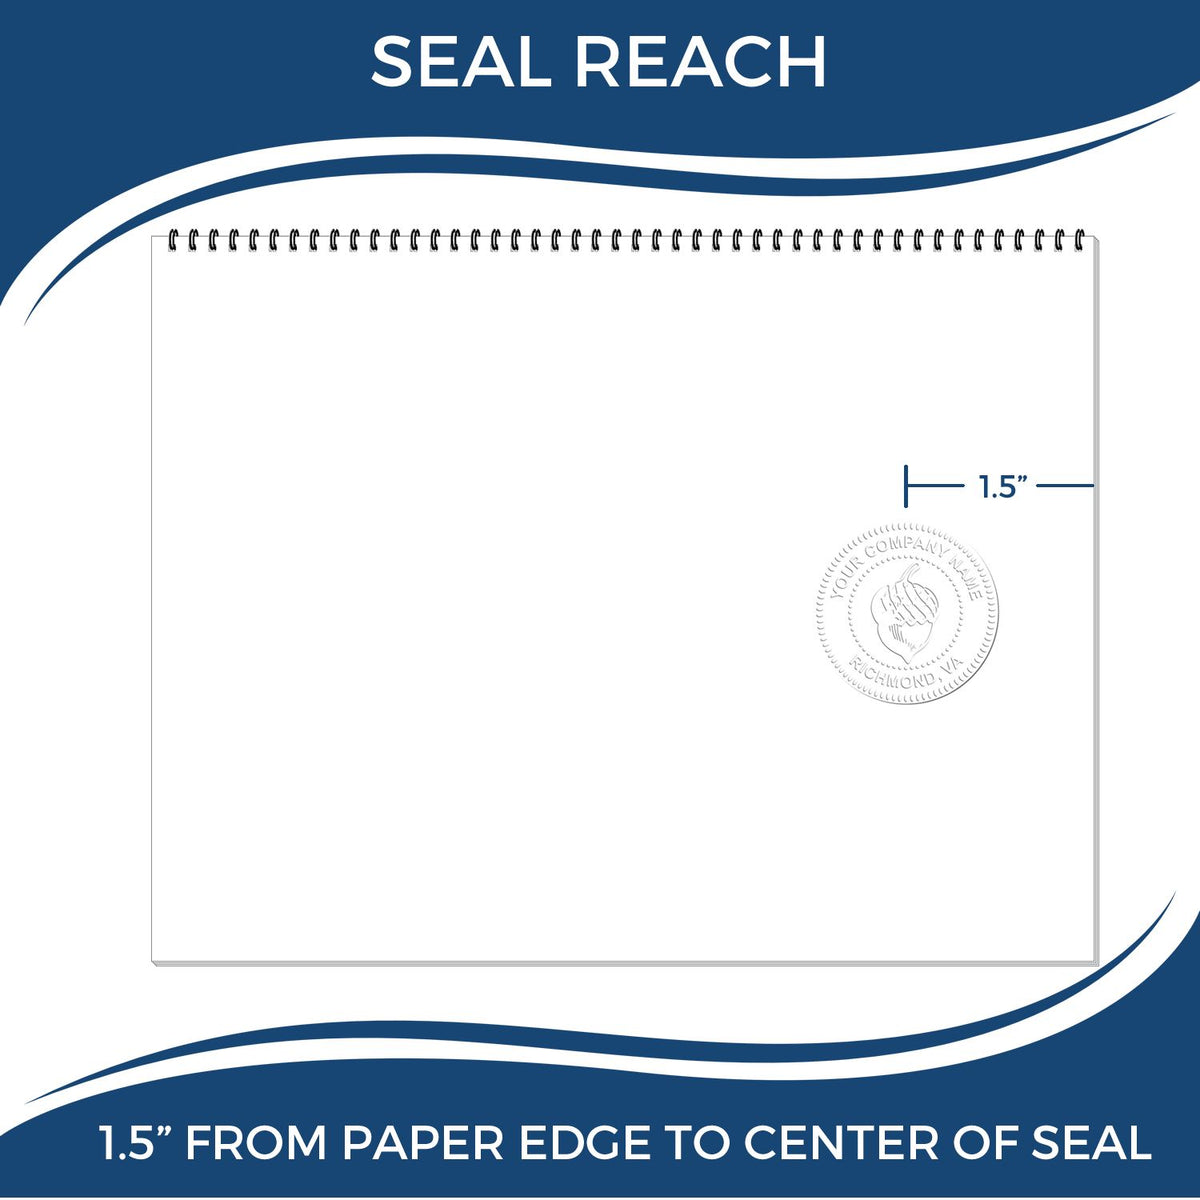 An infographic showing the seal reach which is represented by a ruler and a miniature seal image of the Gift Kansas Landscape Architect Seal